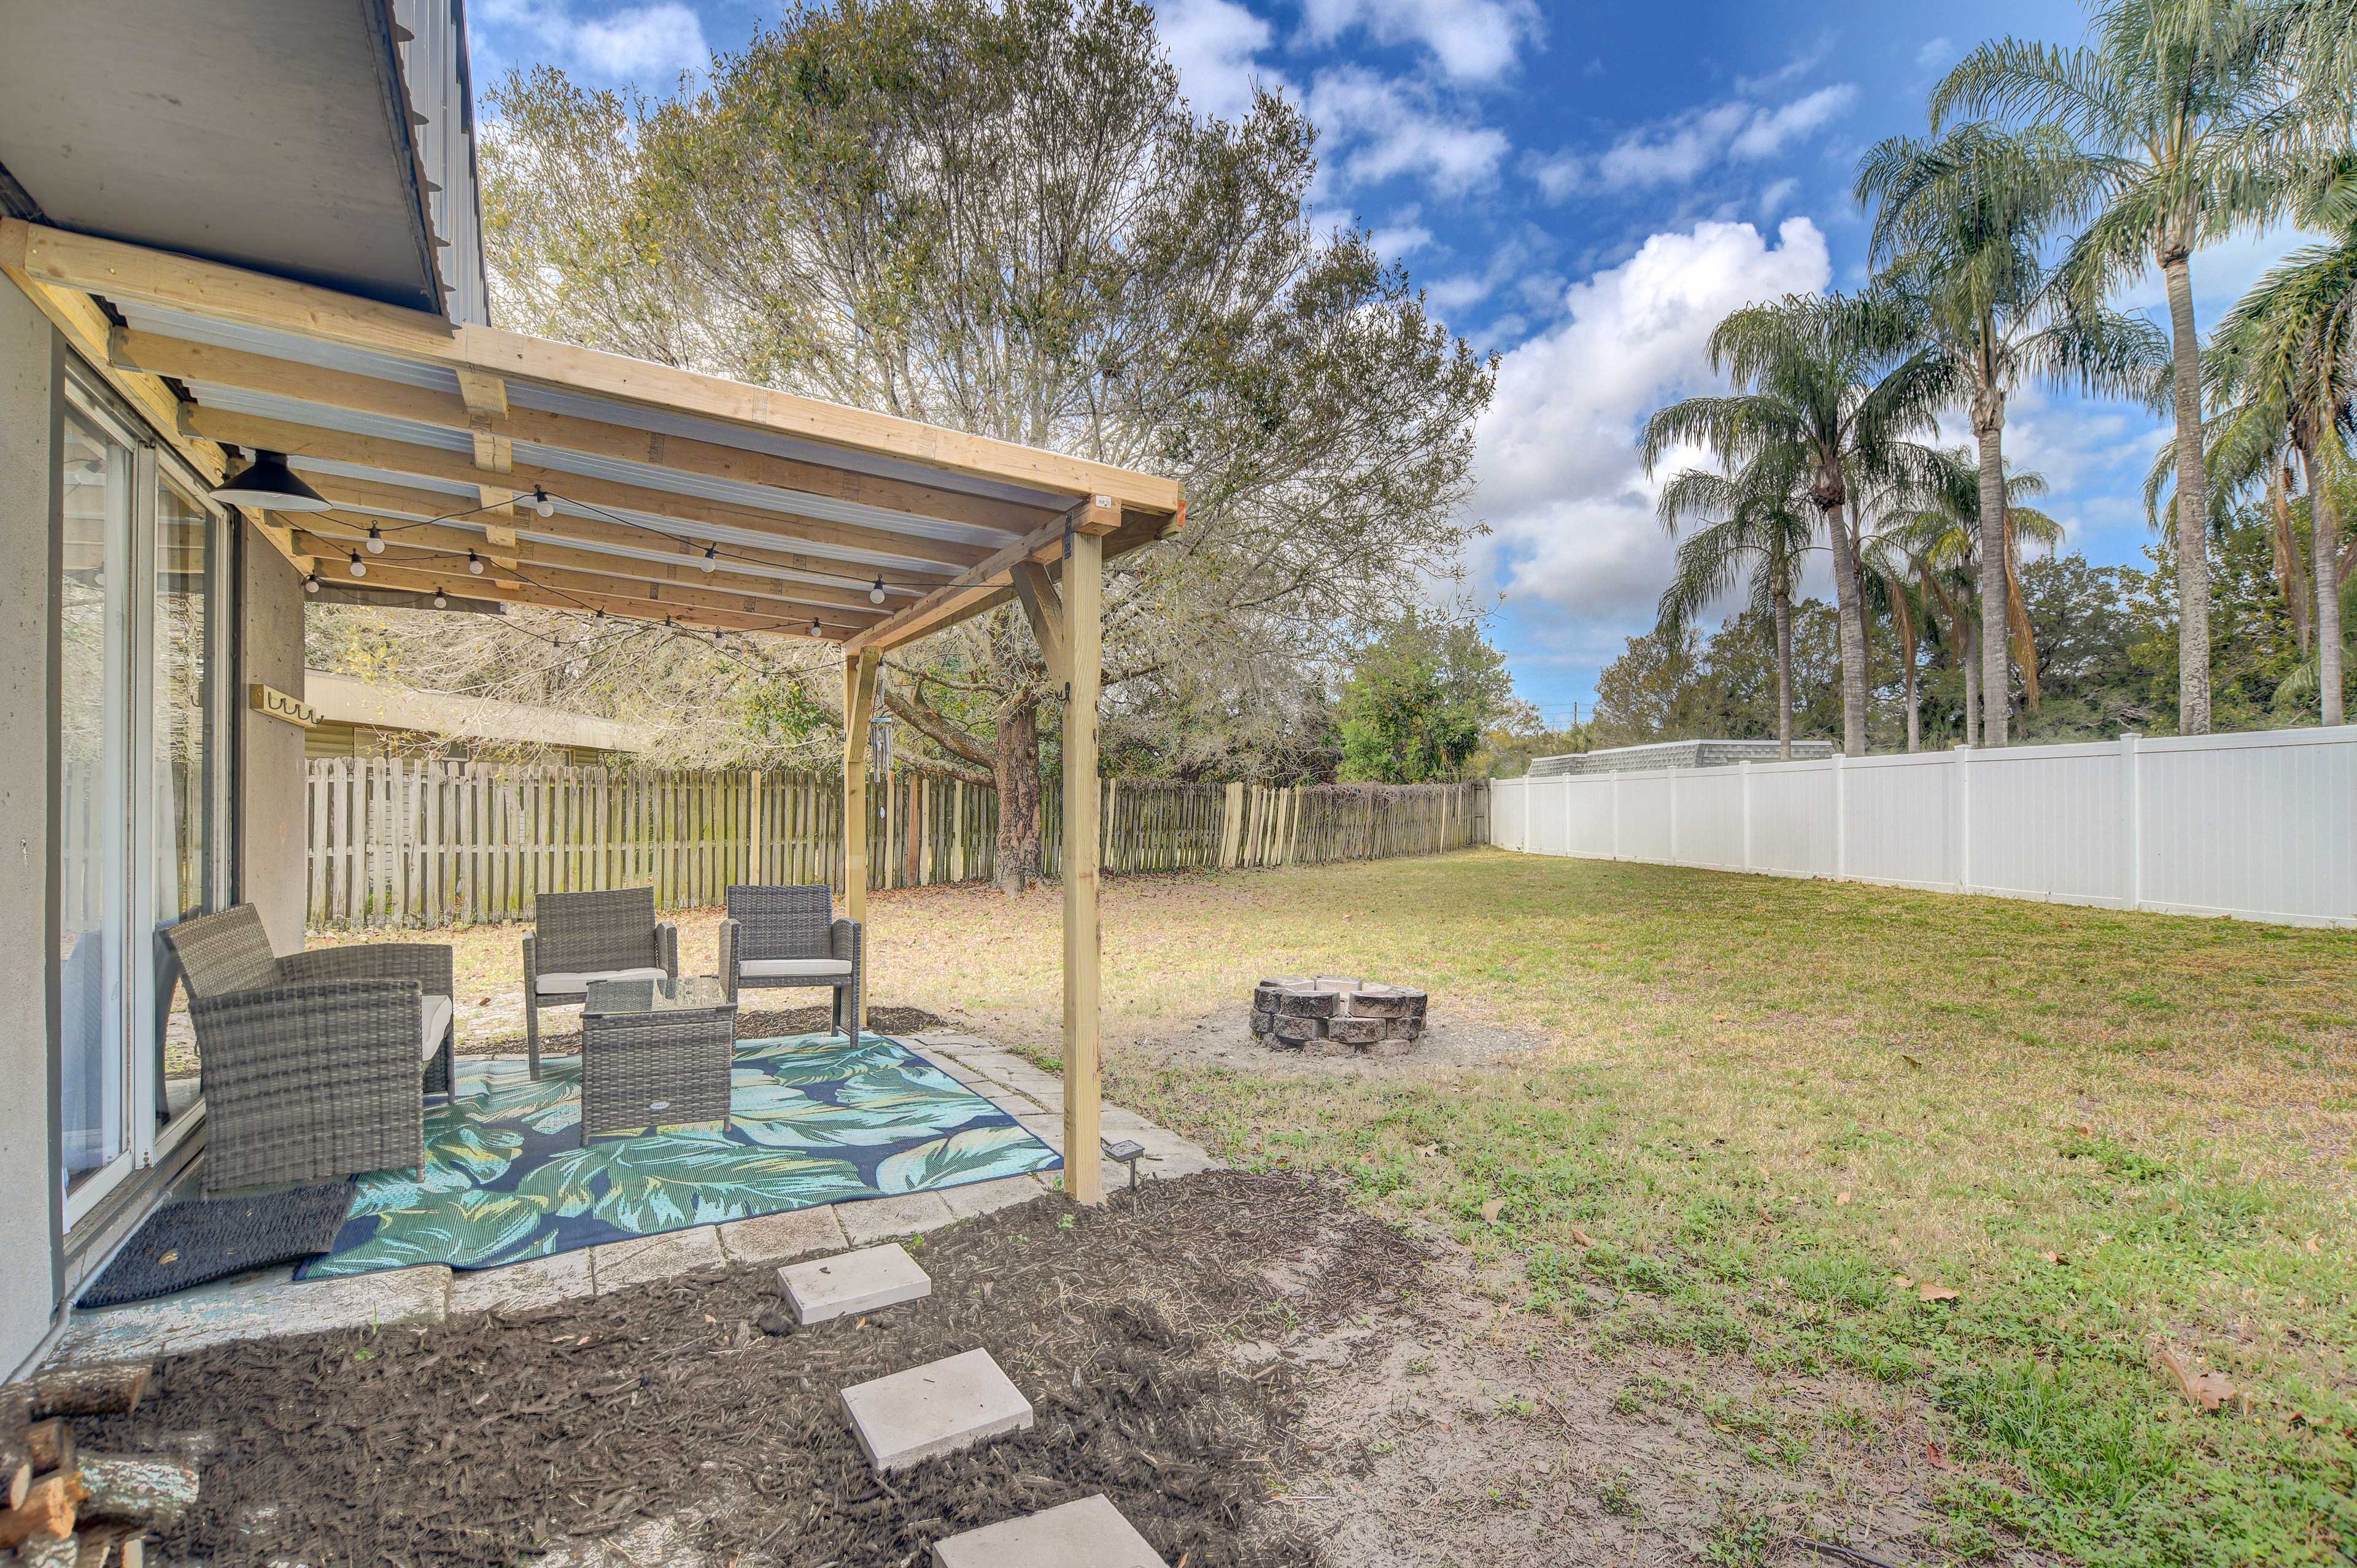 Fenced-In Yard | Fire Pit | Outdoor Shower | Portable Swing